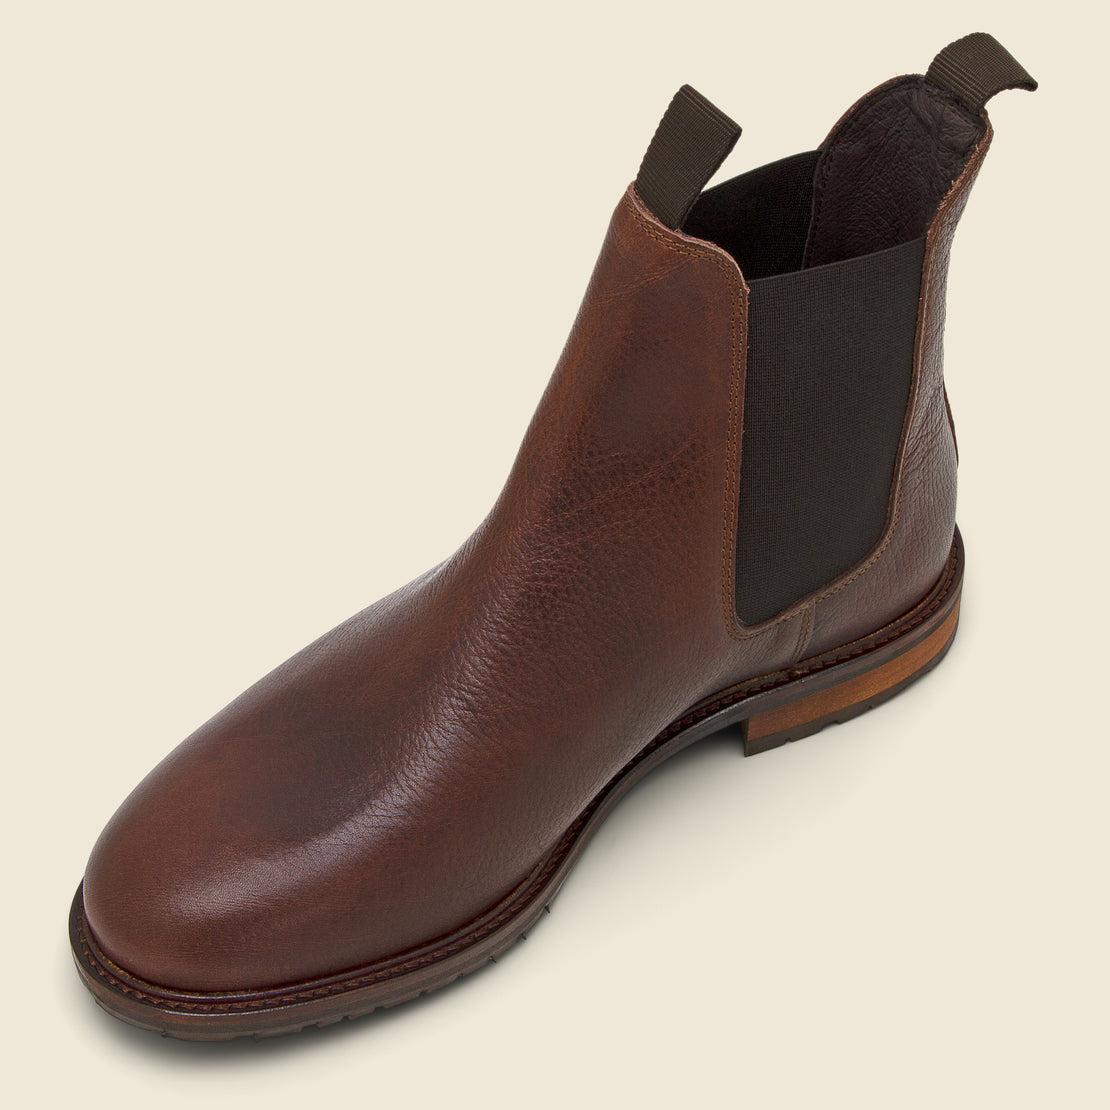 York Leather Chelsea Boot - Brown - Shoe the Bear - STAG Provisions - Shoes - Boots / Chukkas